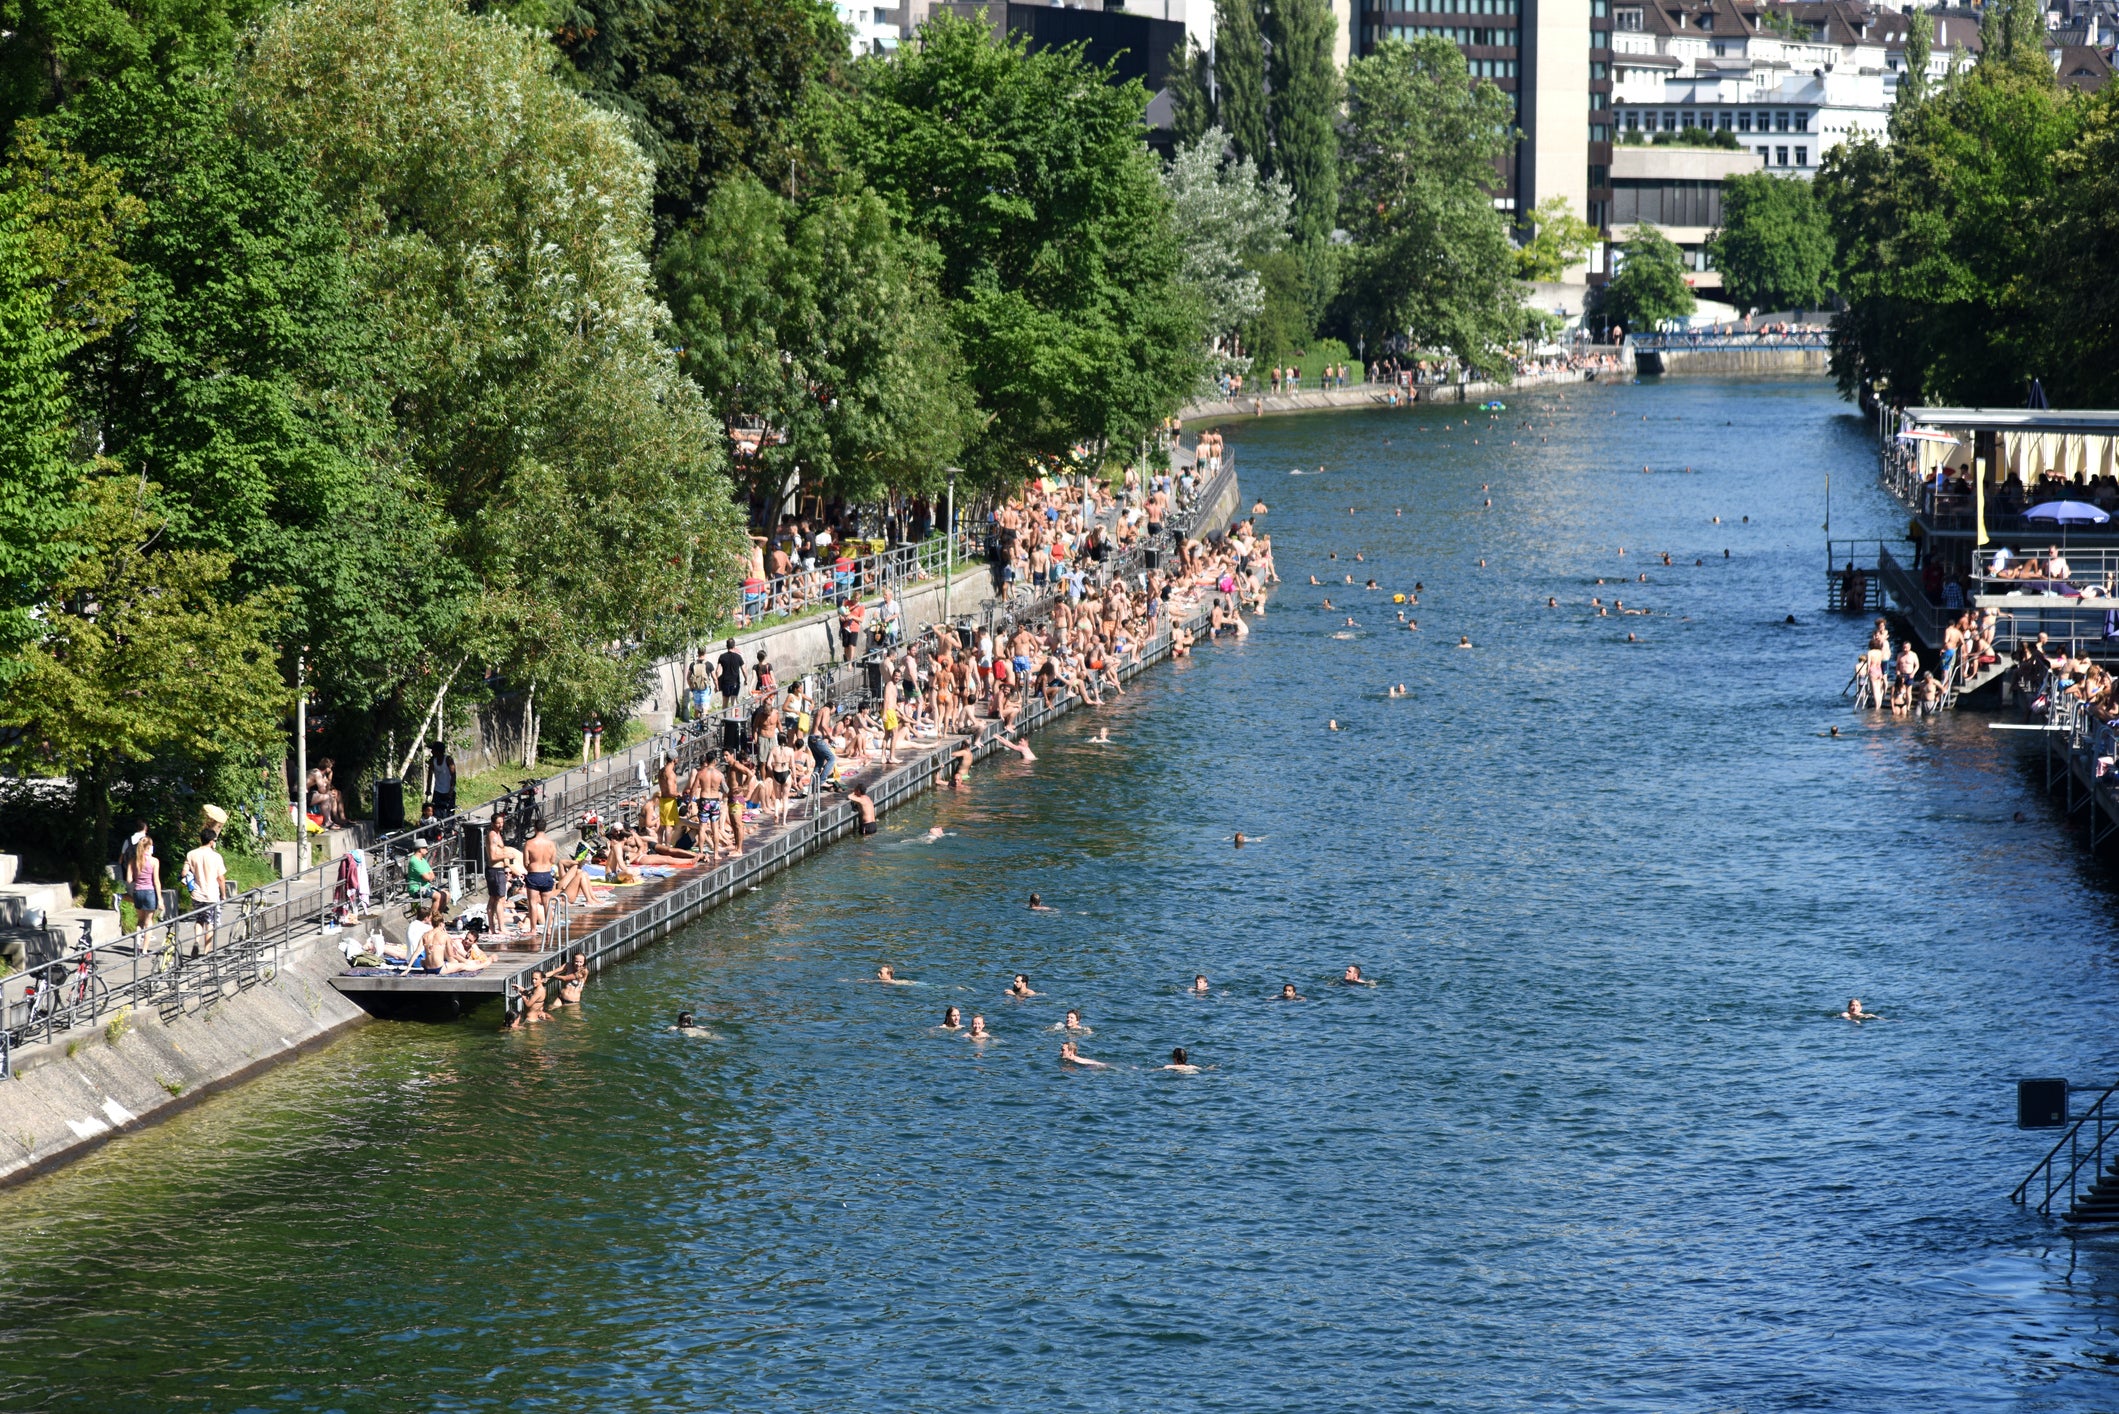 Cooling off in the Limmat